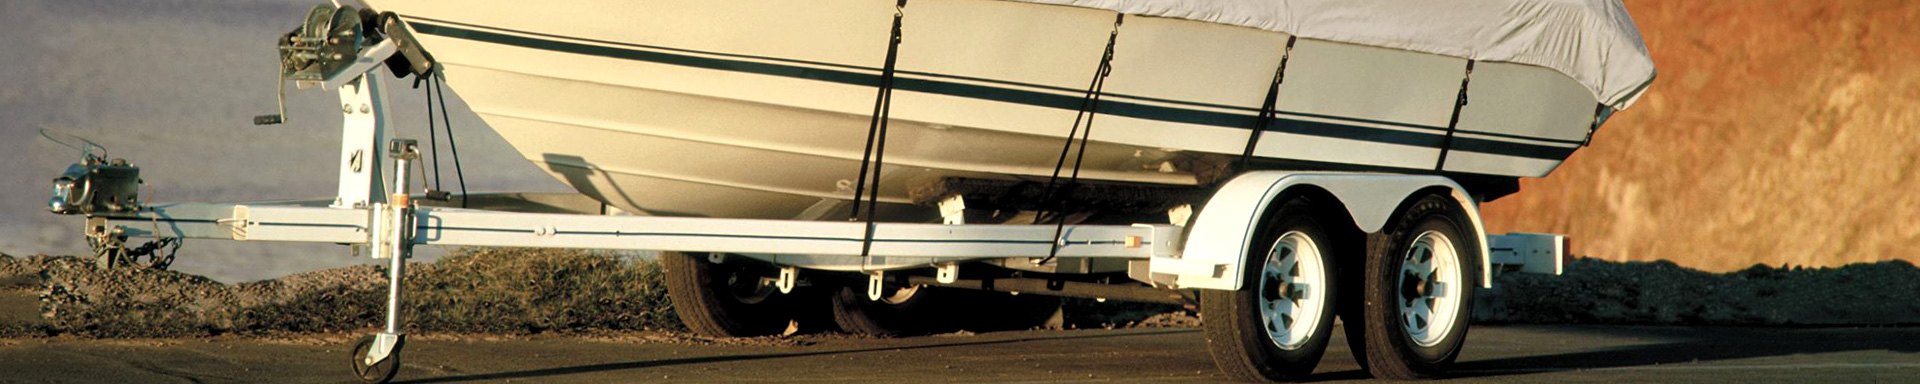 8 Essentials to Check on Your Boat Trailer